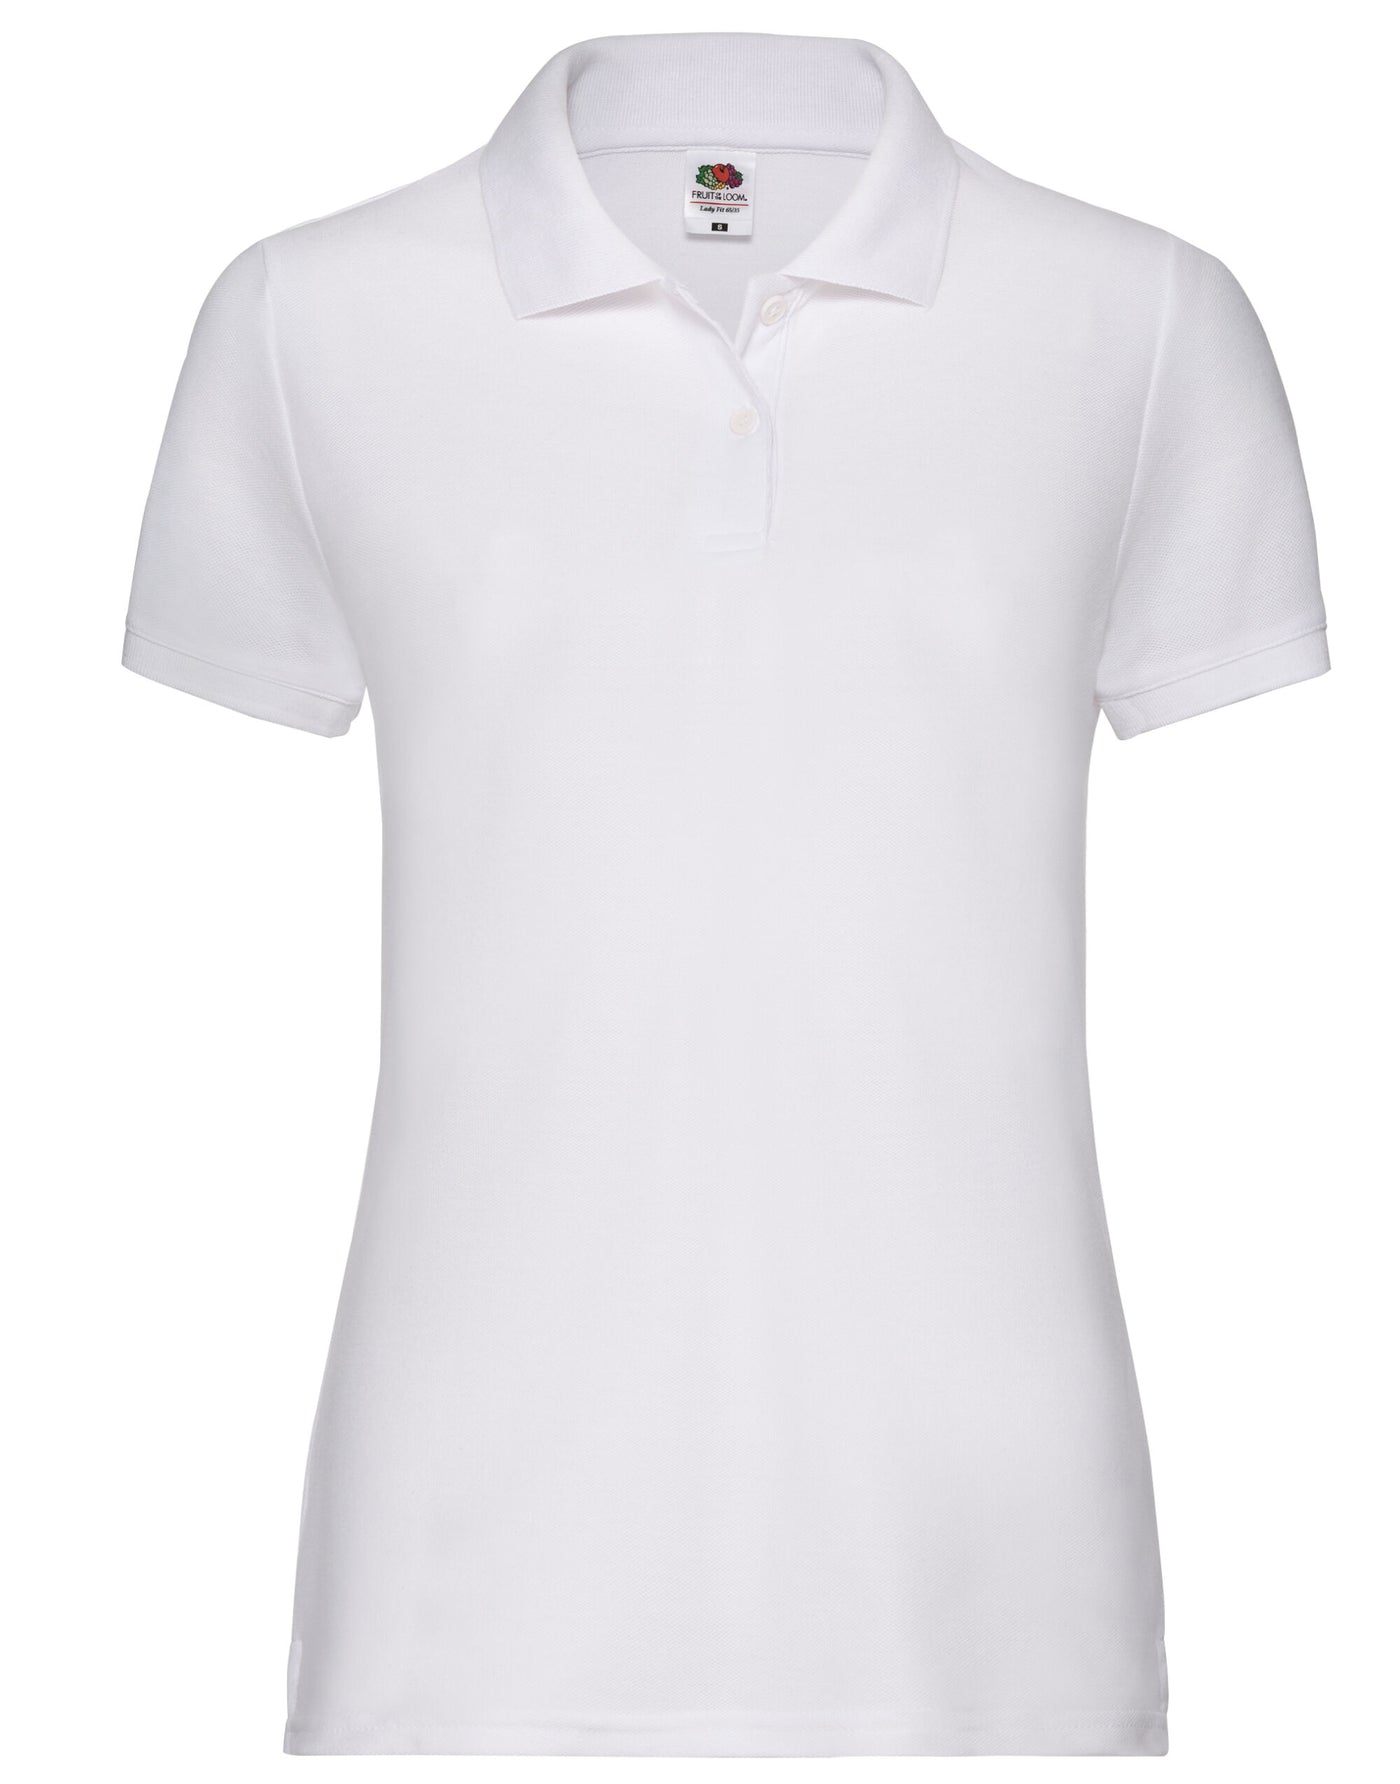 Ladies Fit Polo Shirt In White